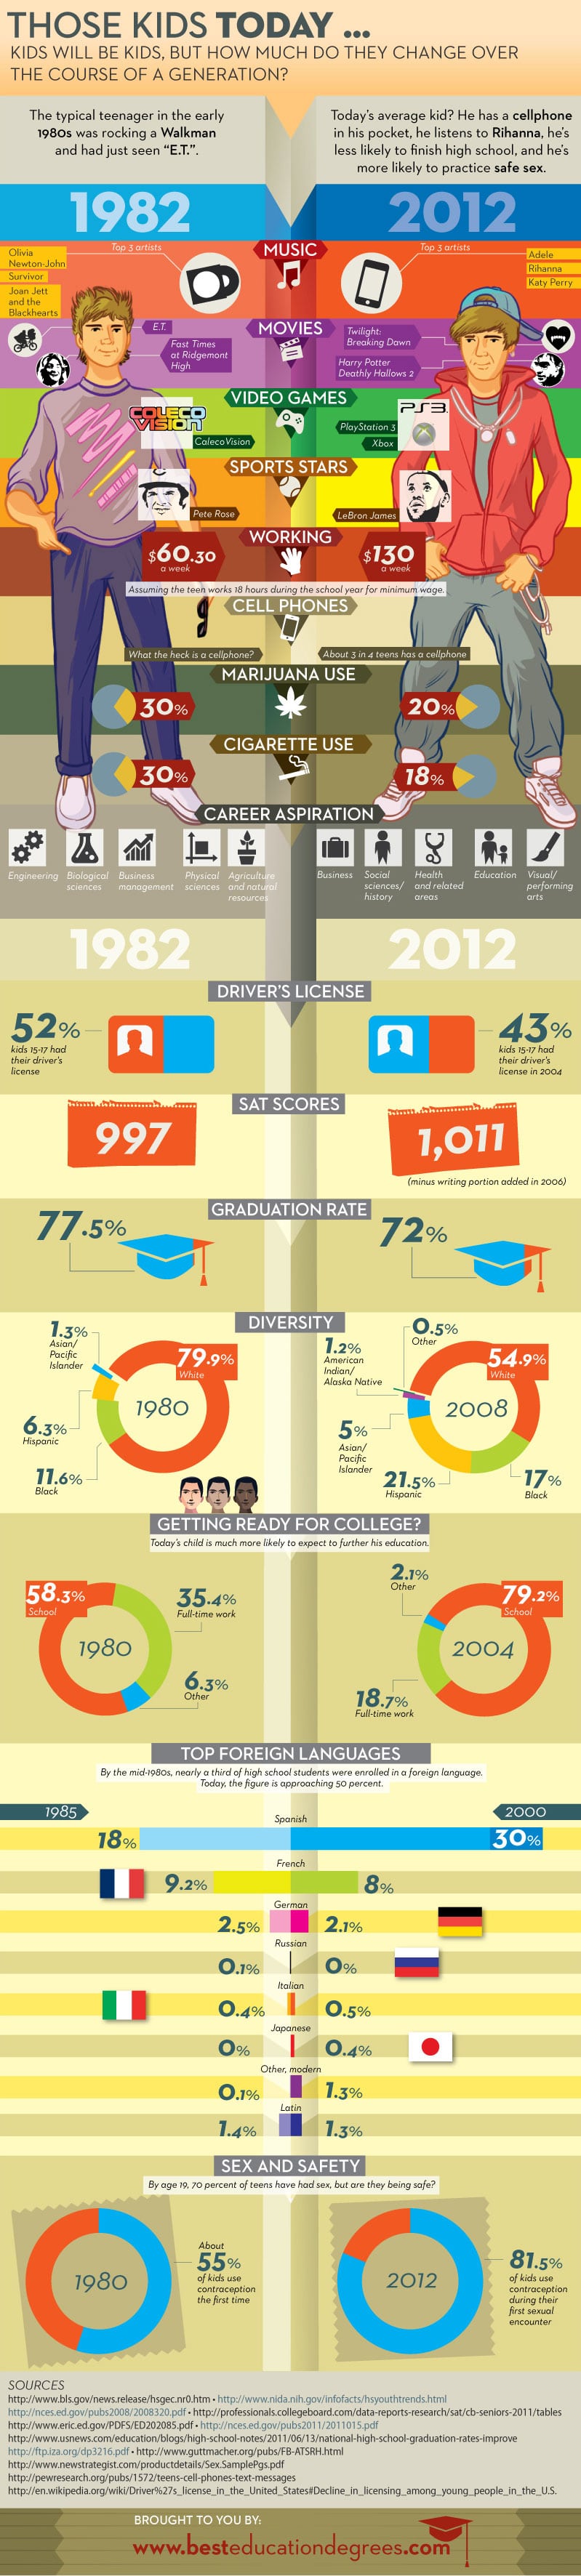 Then-Now-1982-2012-Infographic